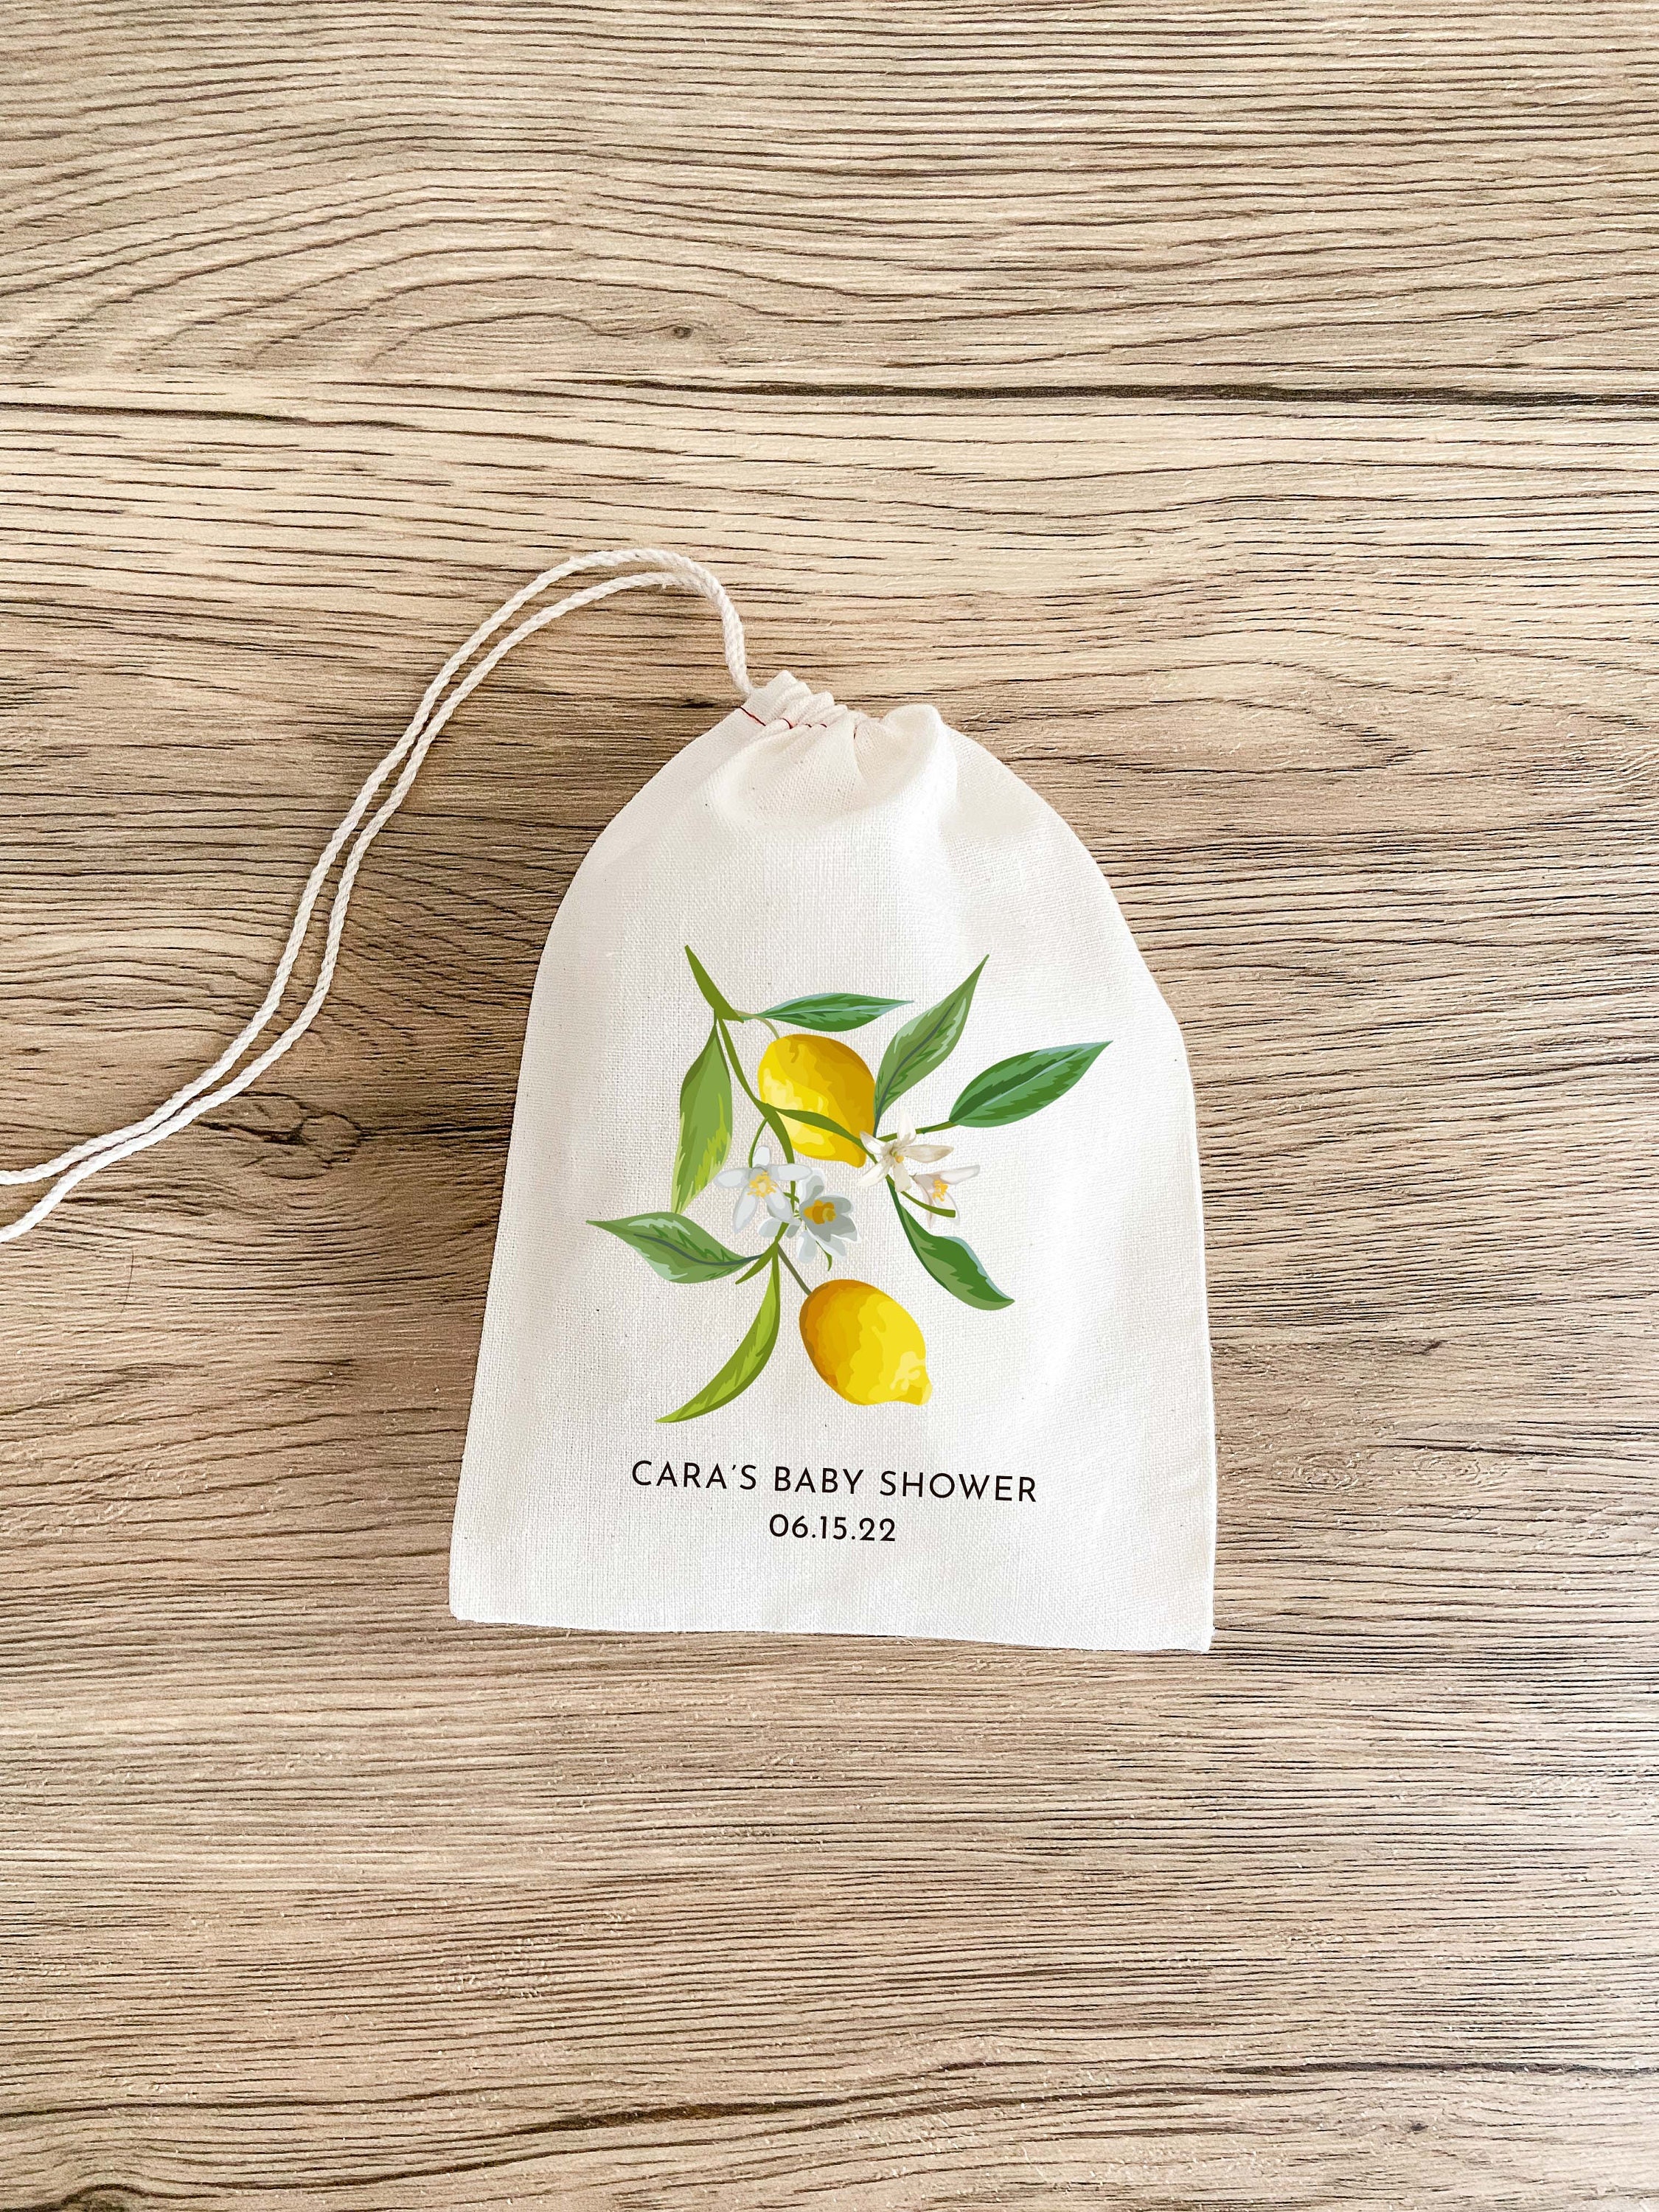 Lovely orange Lemon Candy Bag with Stickers for lemon fruit birthday Party bags  lemon candy bag